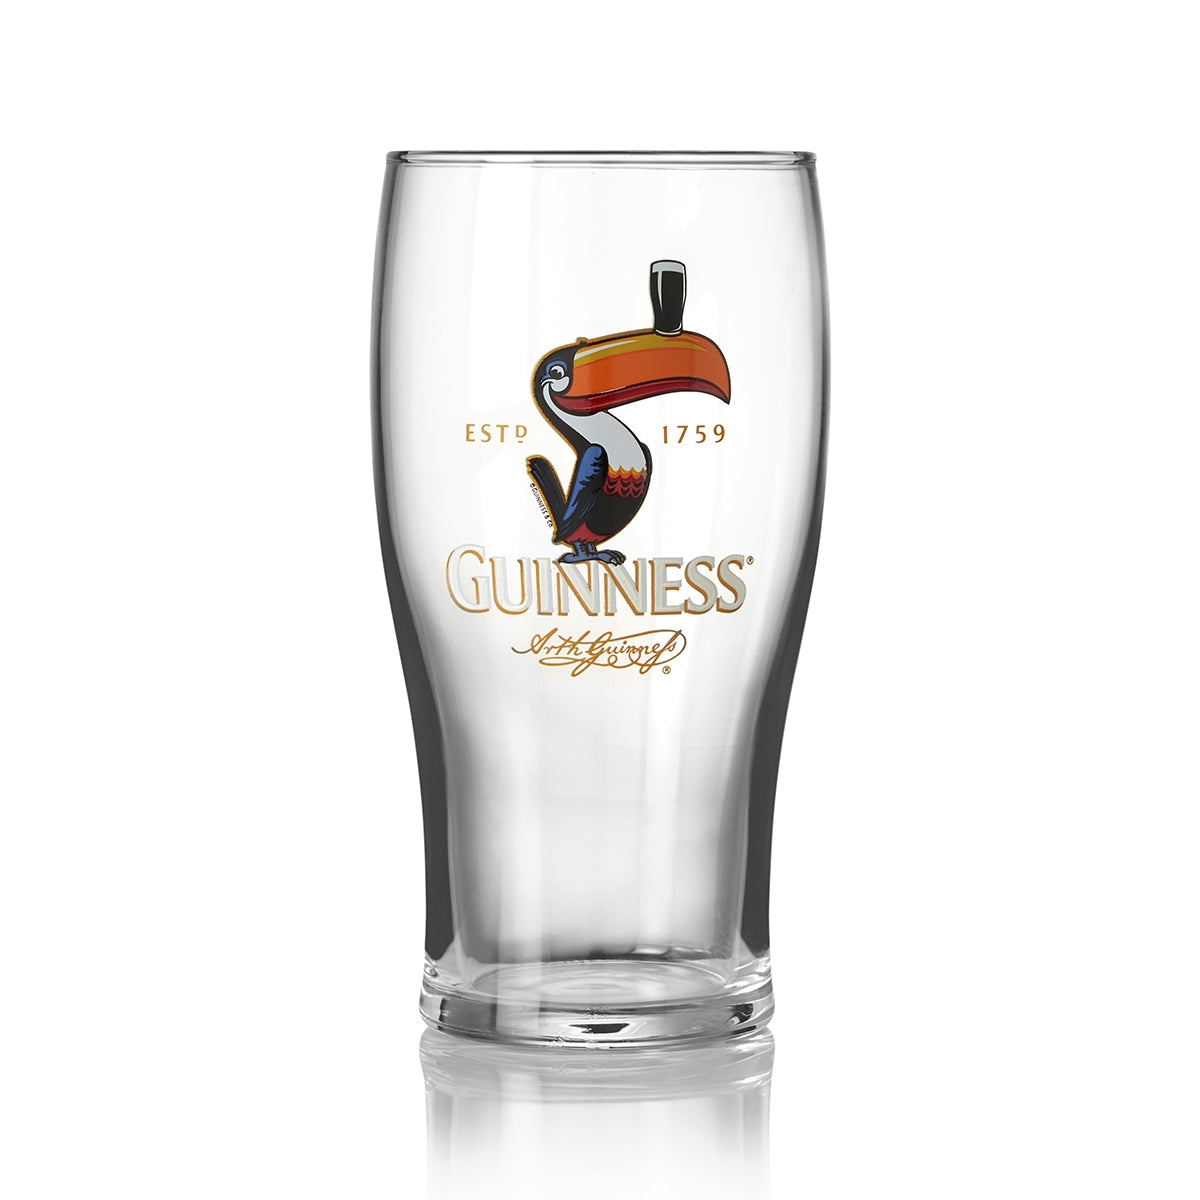 Guinness Toucan Pint Glass - 2 Pack, also known as a Guinness UK pint glass.